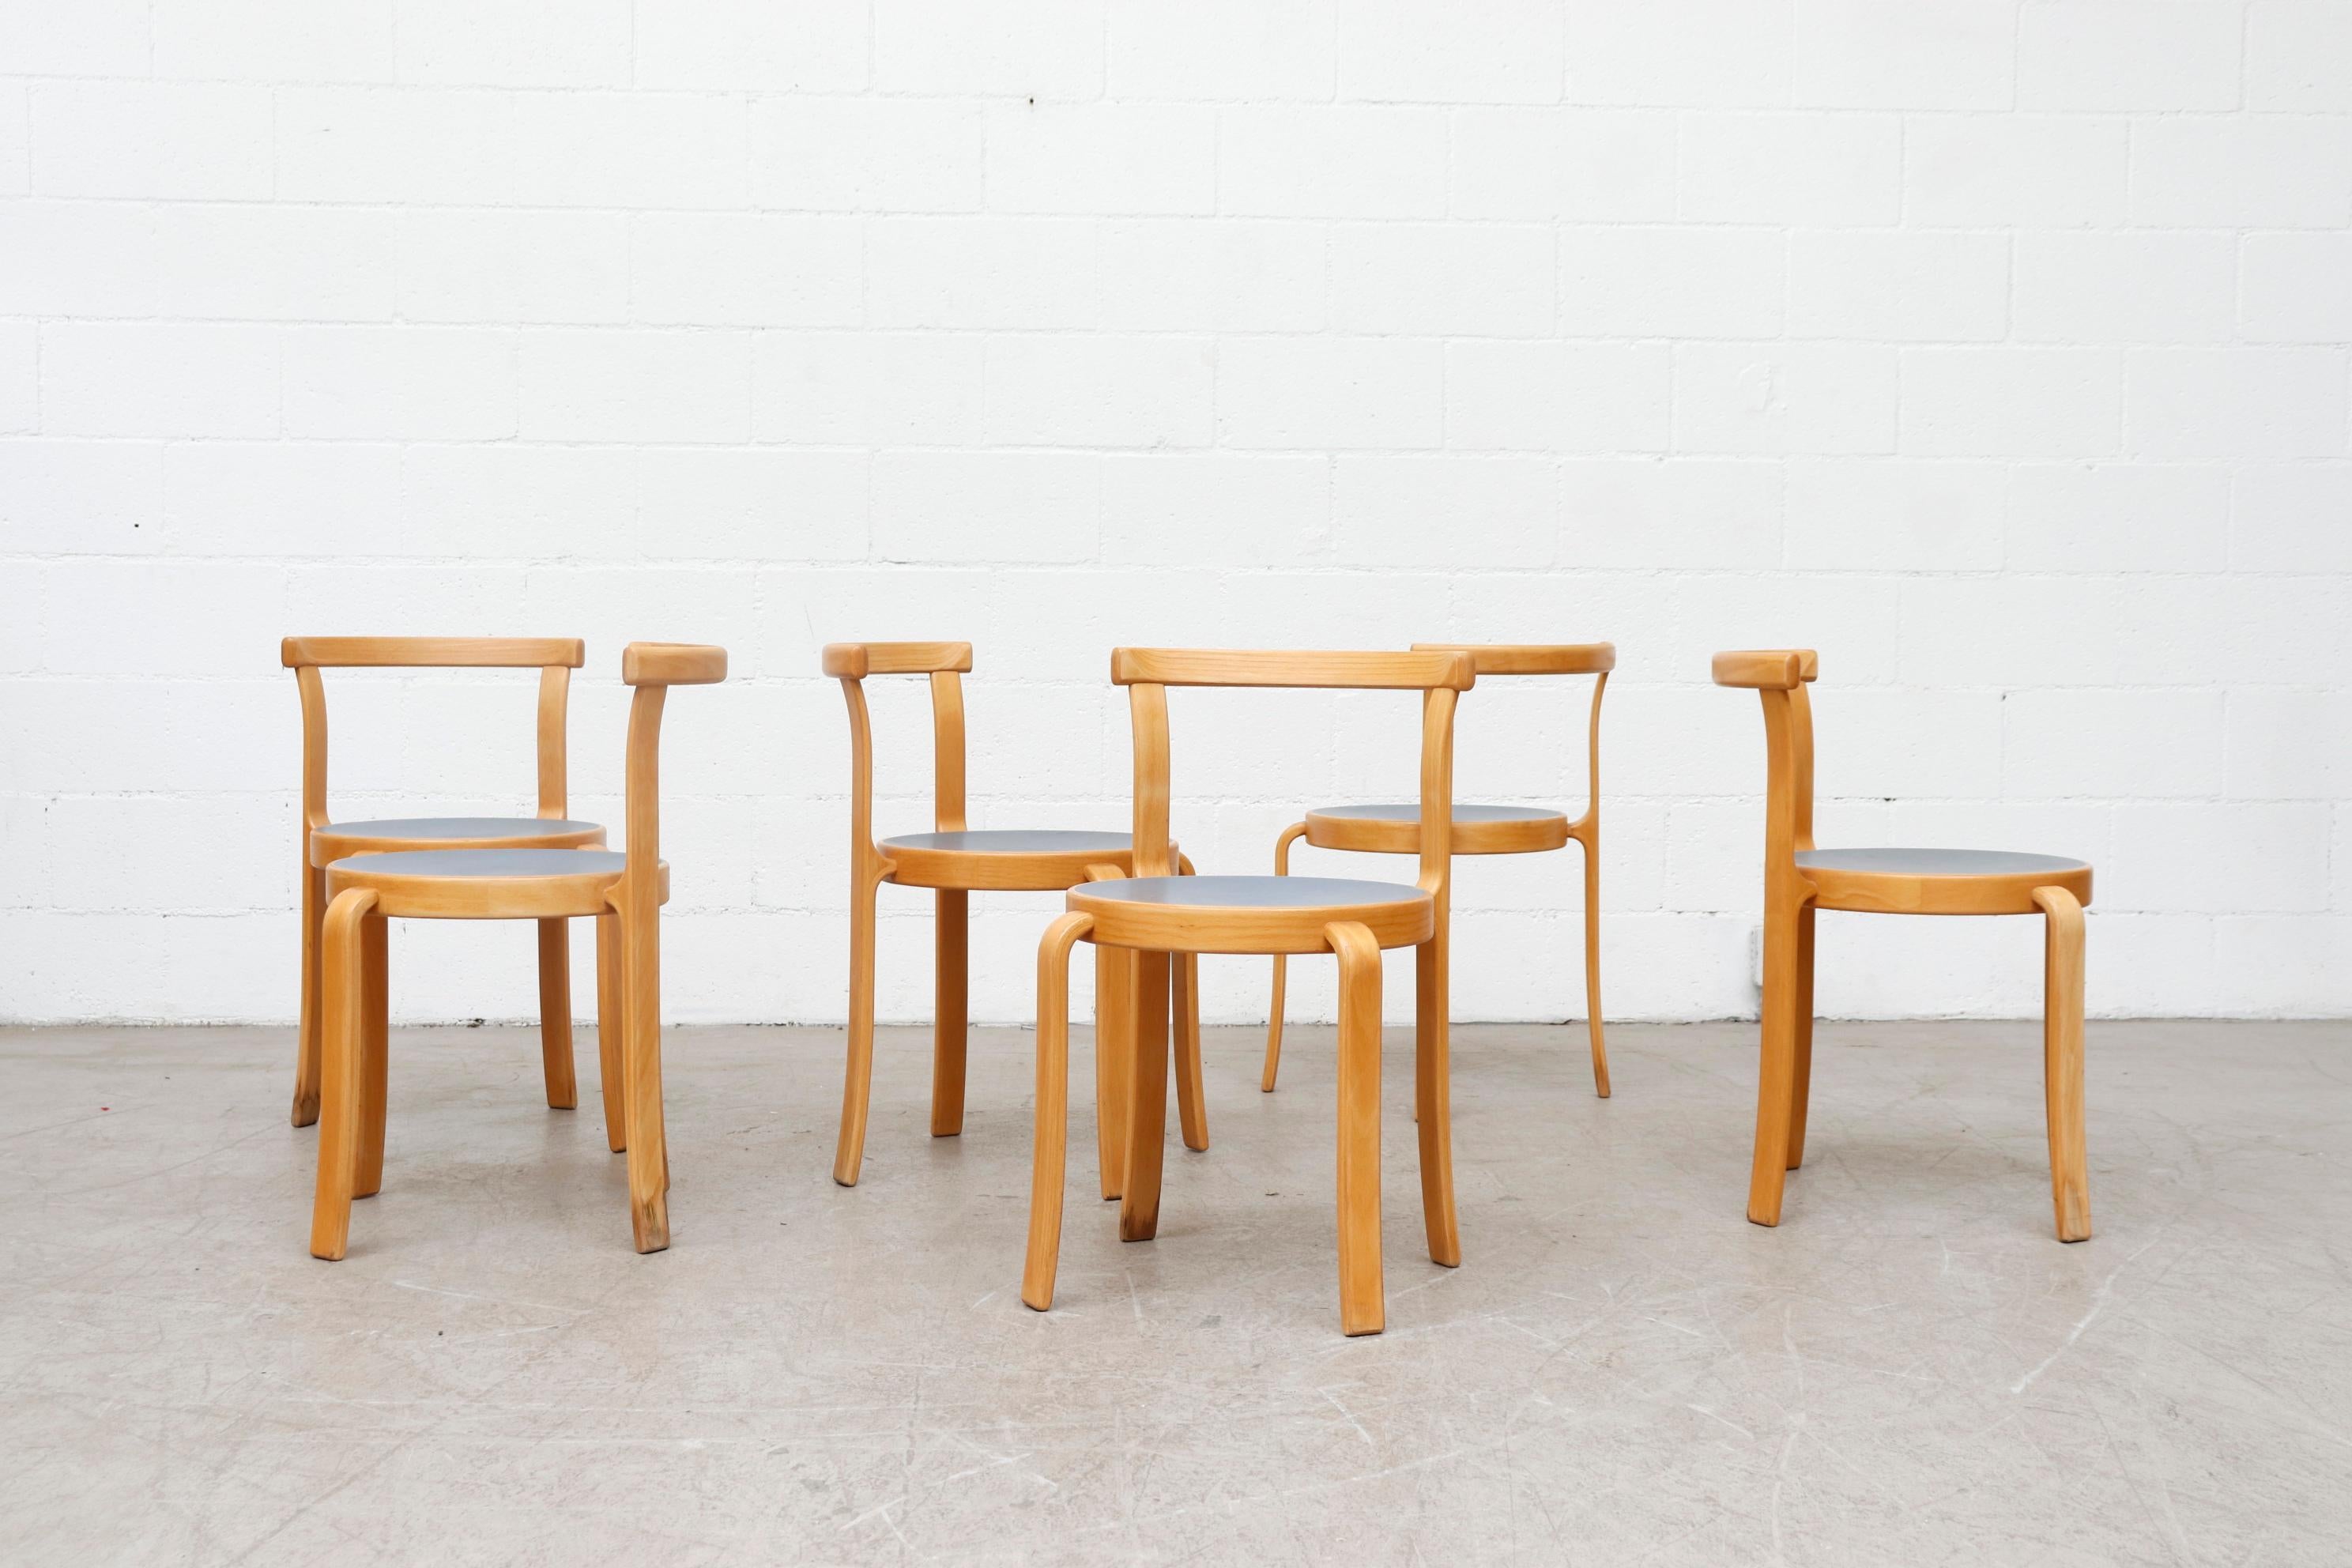 Stackable Series 8000 Danish chairs stylish curved beech wood, blue/grey linoleum seat designed by Rud Thygesen & Johnny Sorensen for Magnus Olesen 1970s. Made in Denmark. In Good original condition with some visible wear to seats and frame. Listed